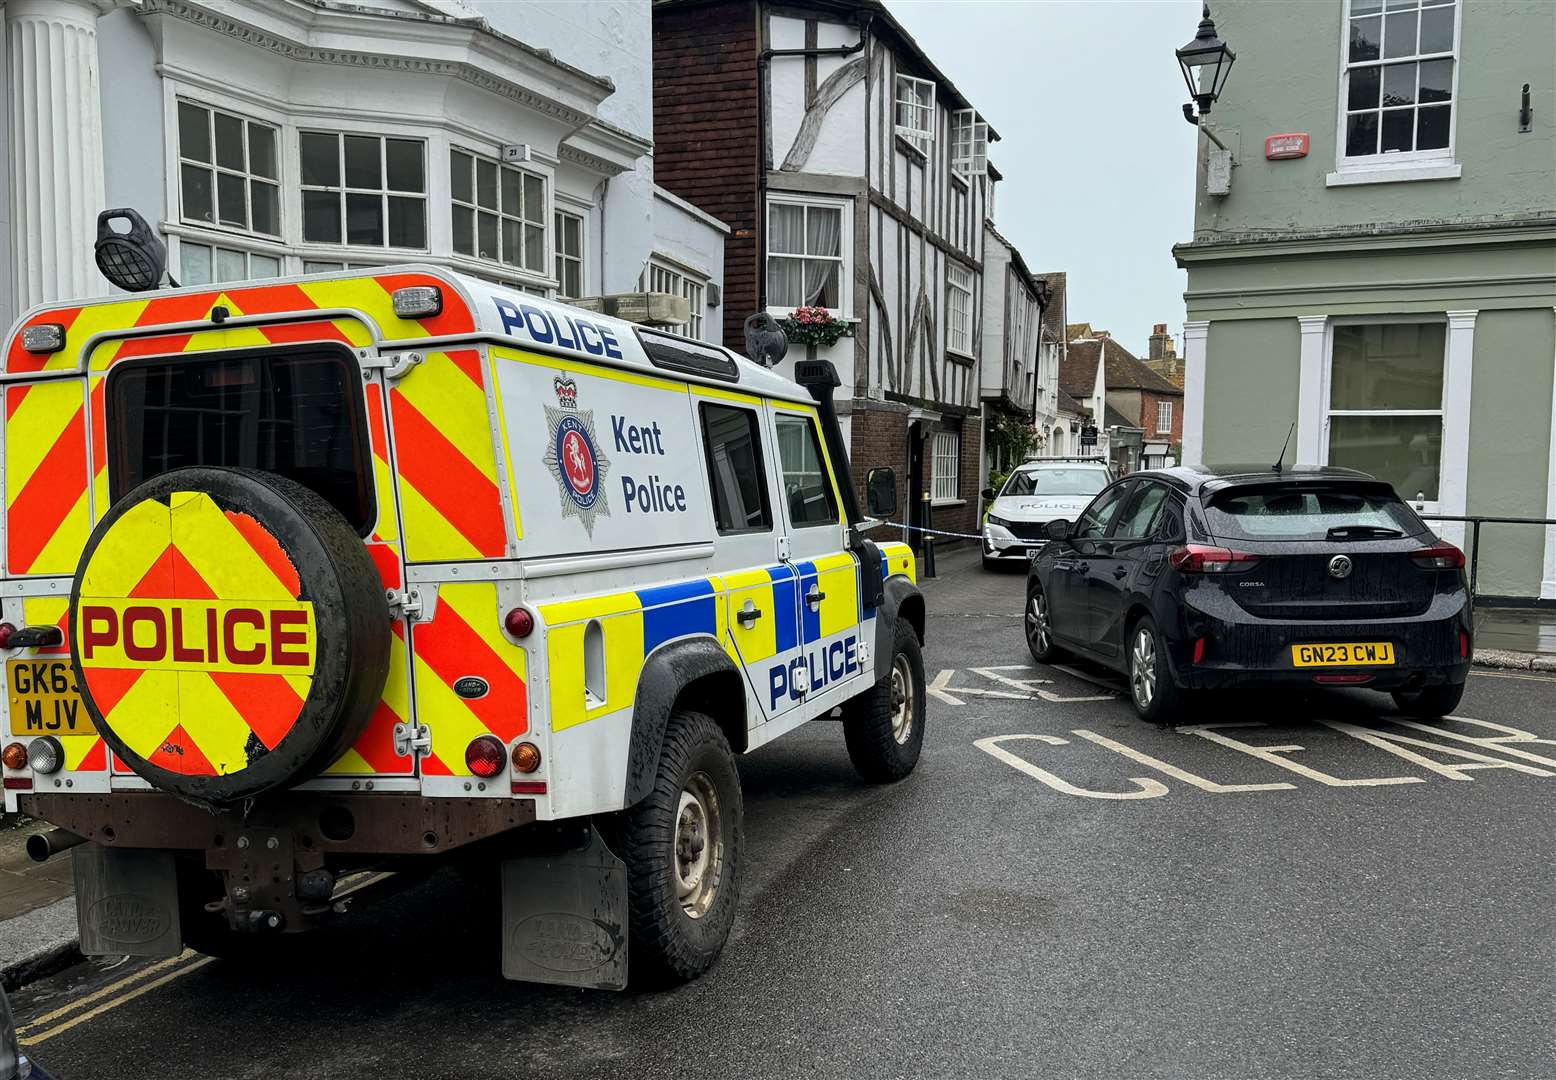 Police remain in Sandwich today following the discovery of two people in their 90s yesterday